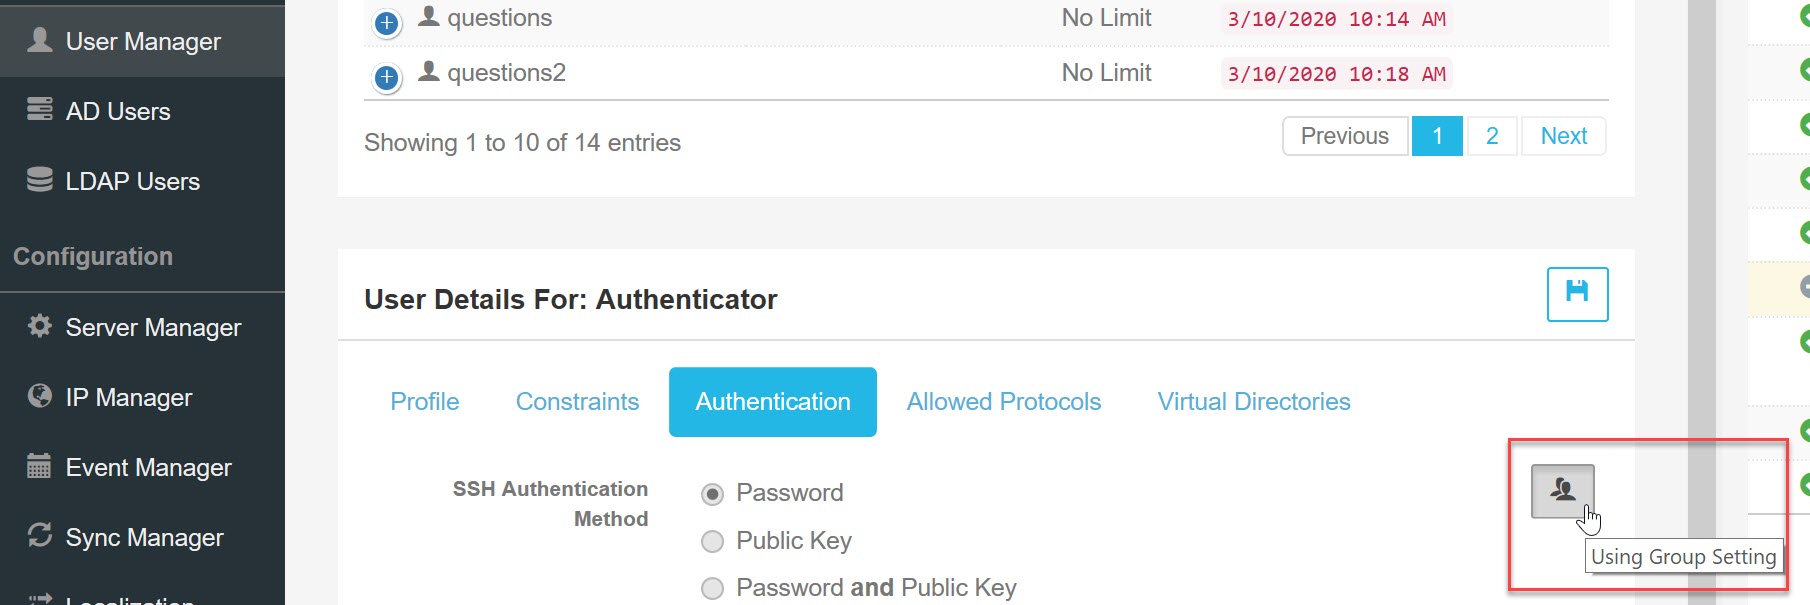 users_authentication_requirements_2fa_override.jpg